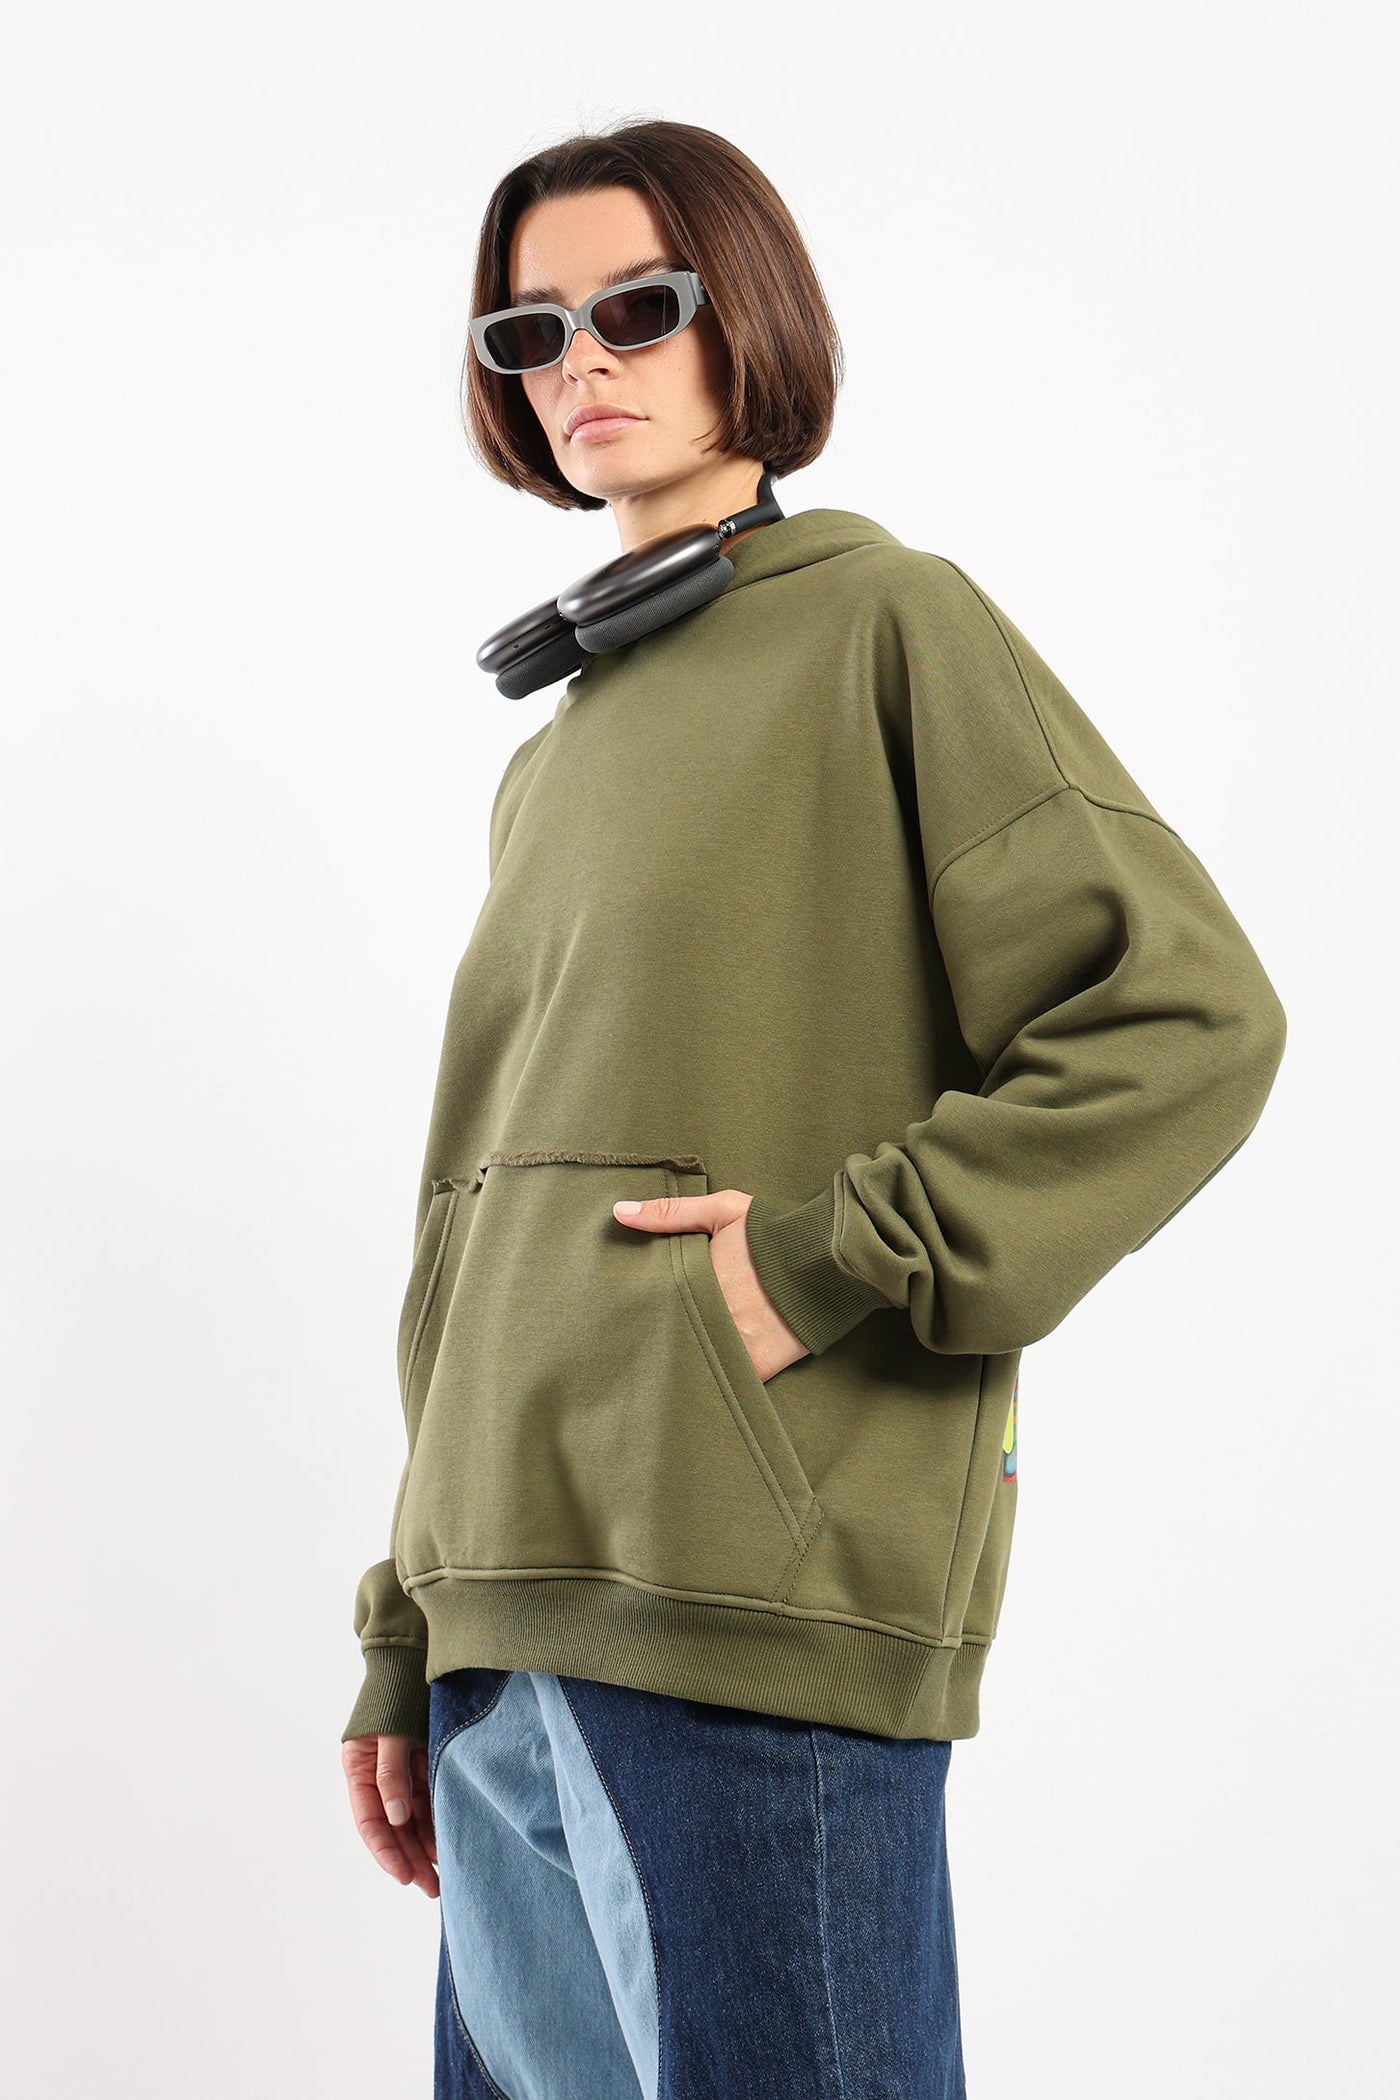 OUT OF MIND HOODIE - KHAKI